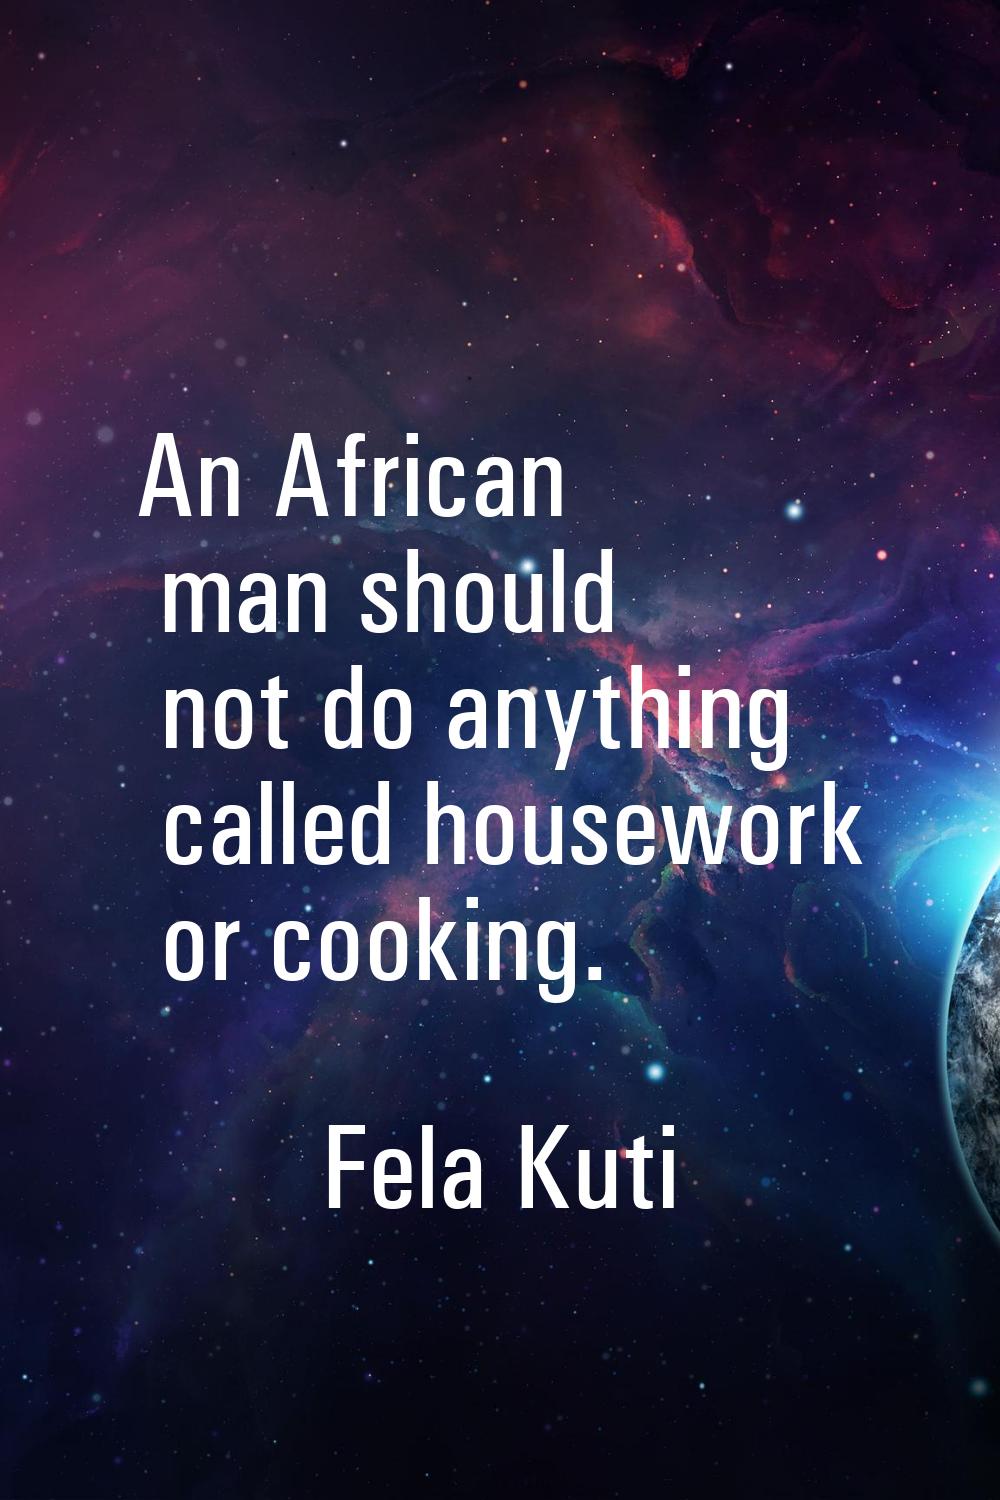 An African man should not do anything called housework or cooking.